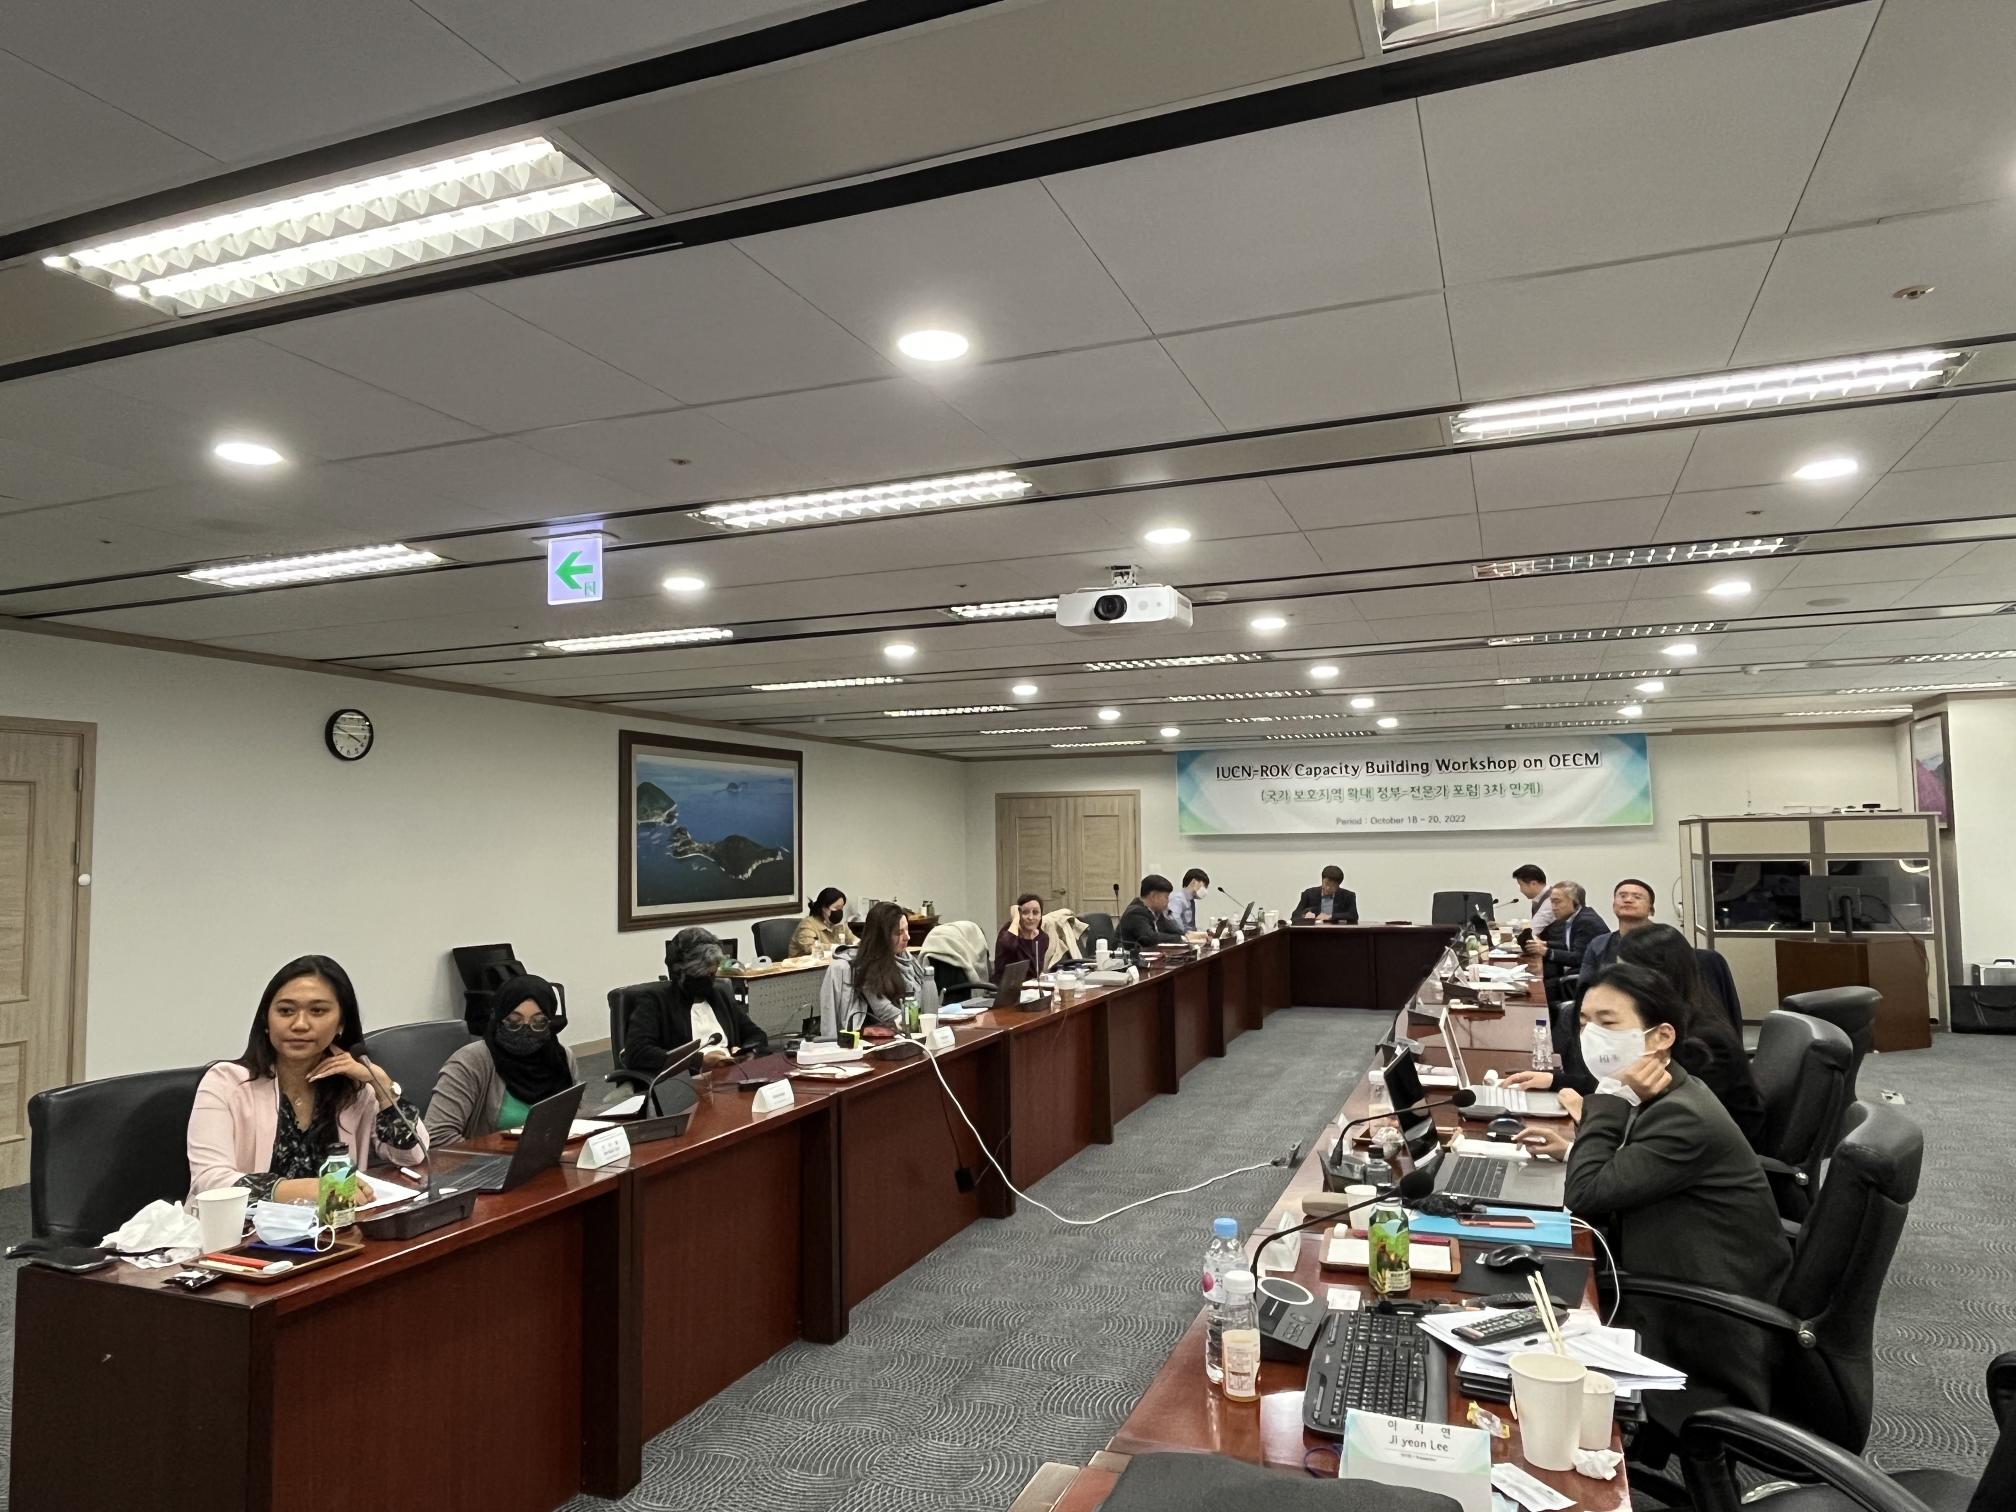 The national and regional dialogue on OECMs, held in Seoul, from 19 to 20 October 2022